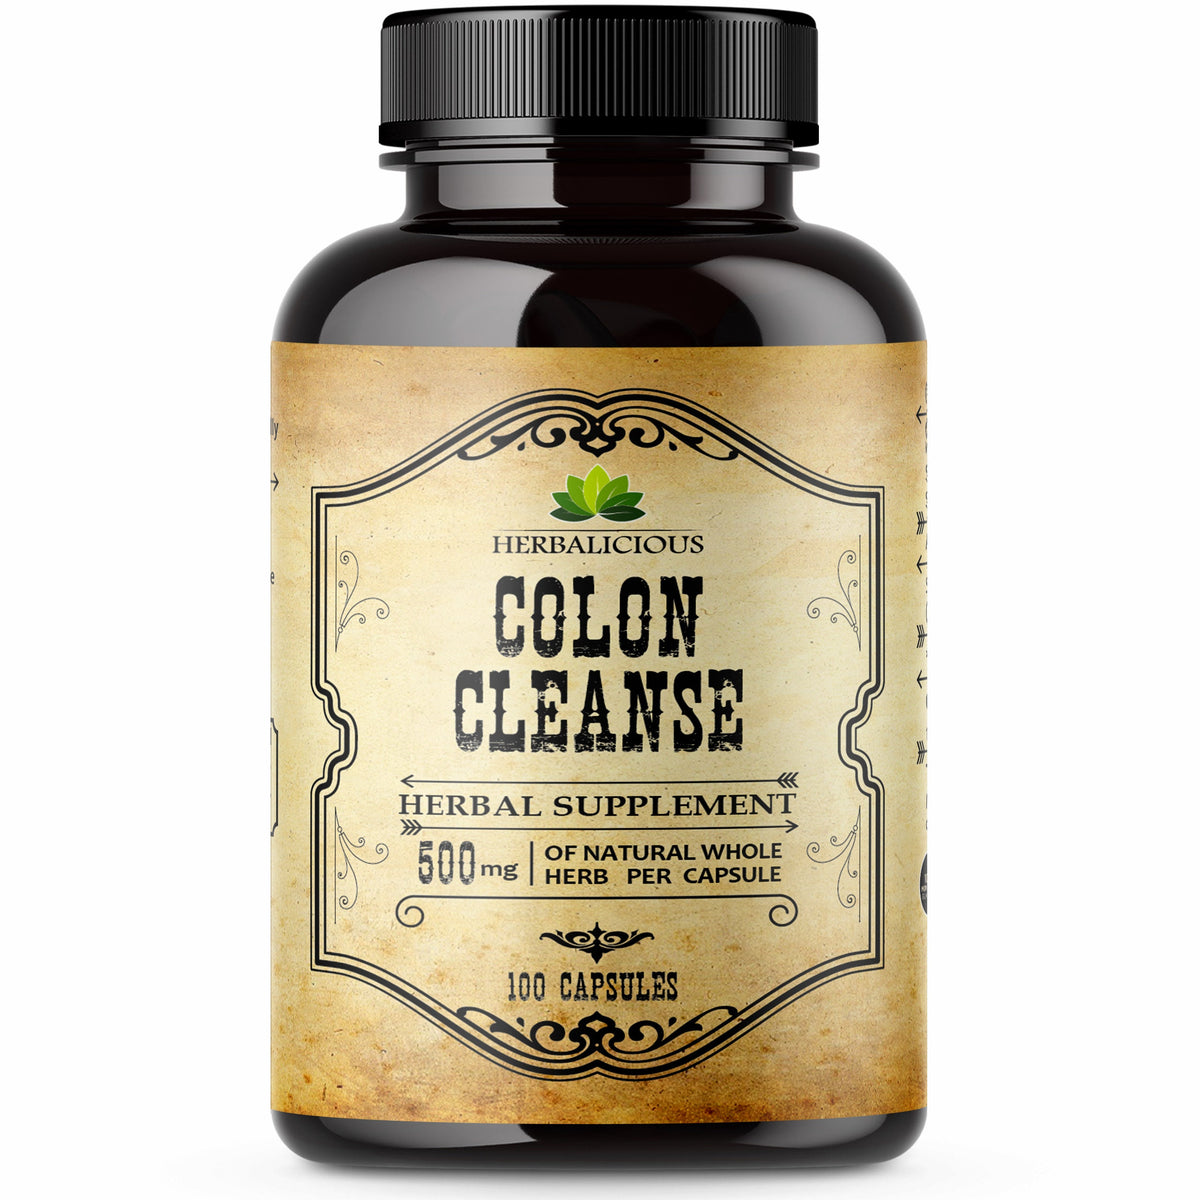 Colon Cleanse – 100 Capsules Color Cleanser Dietary Supplement All Natural Senna Leaf Powder Herbal Supplement Promotes Digestive Regularity